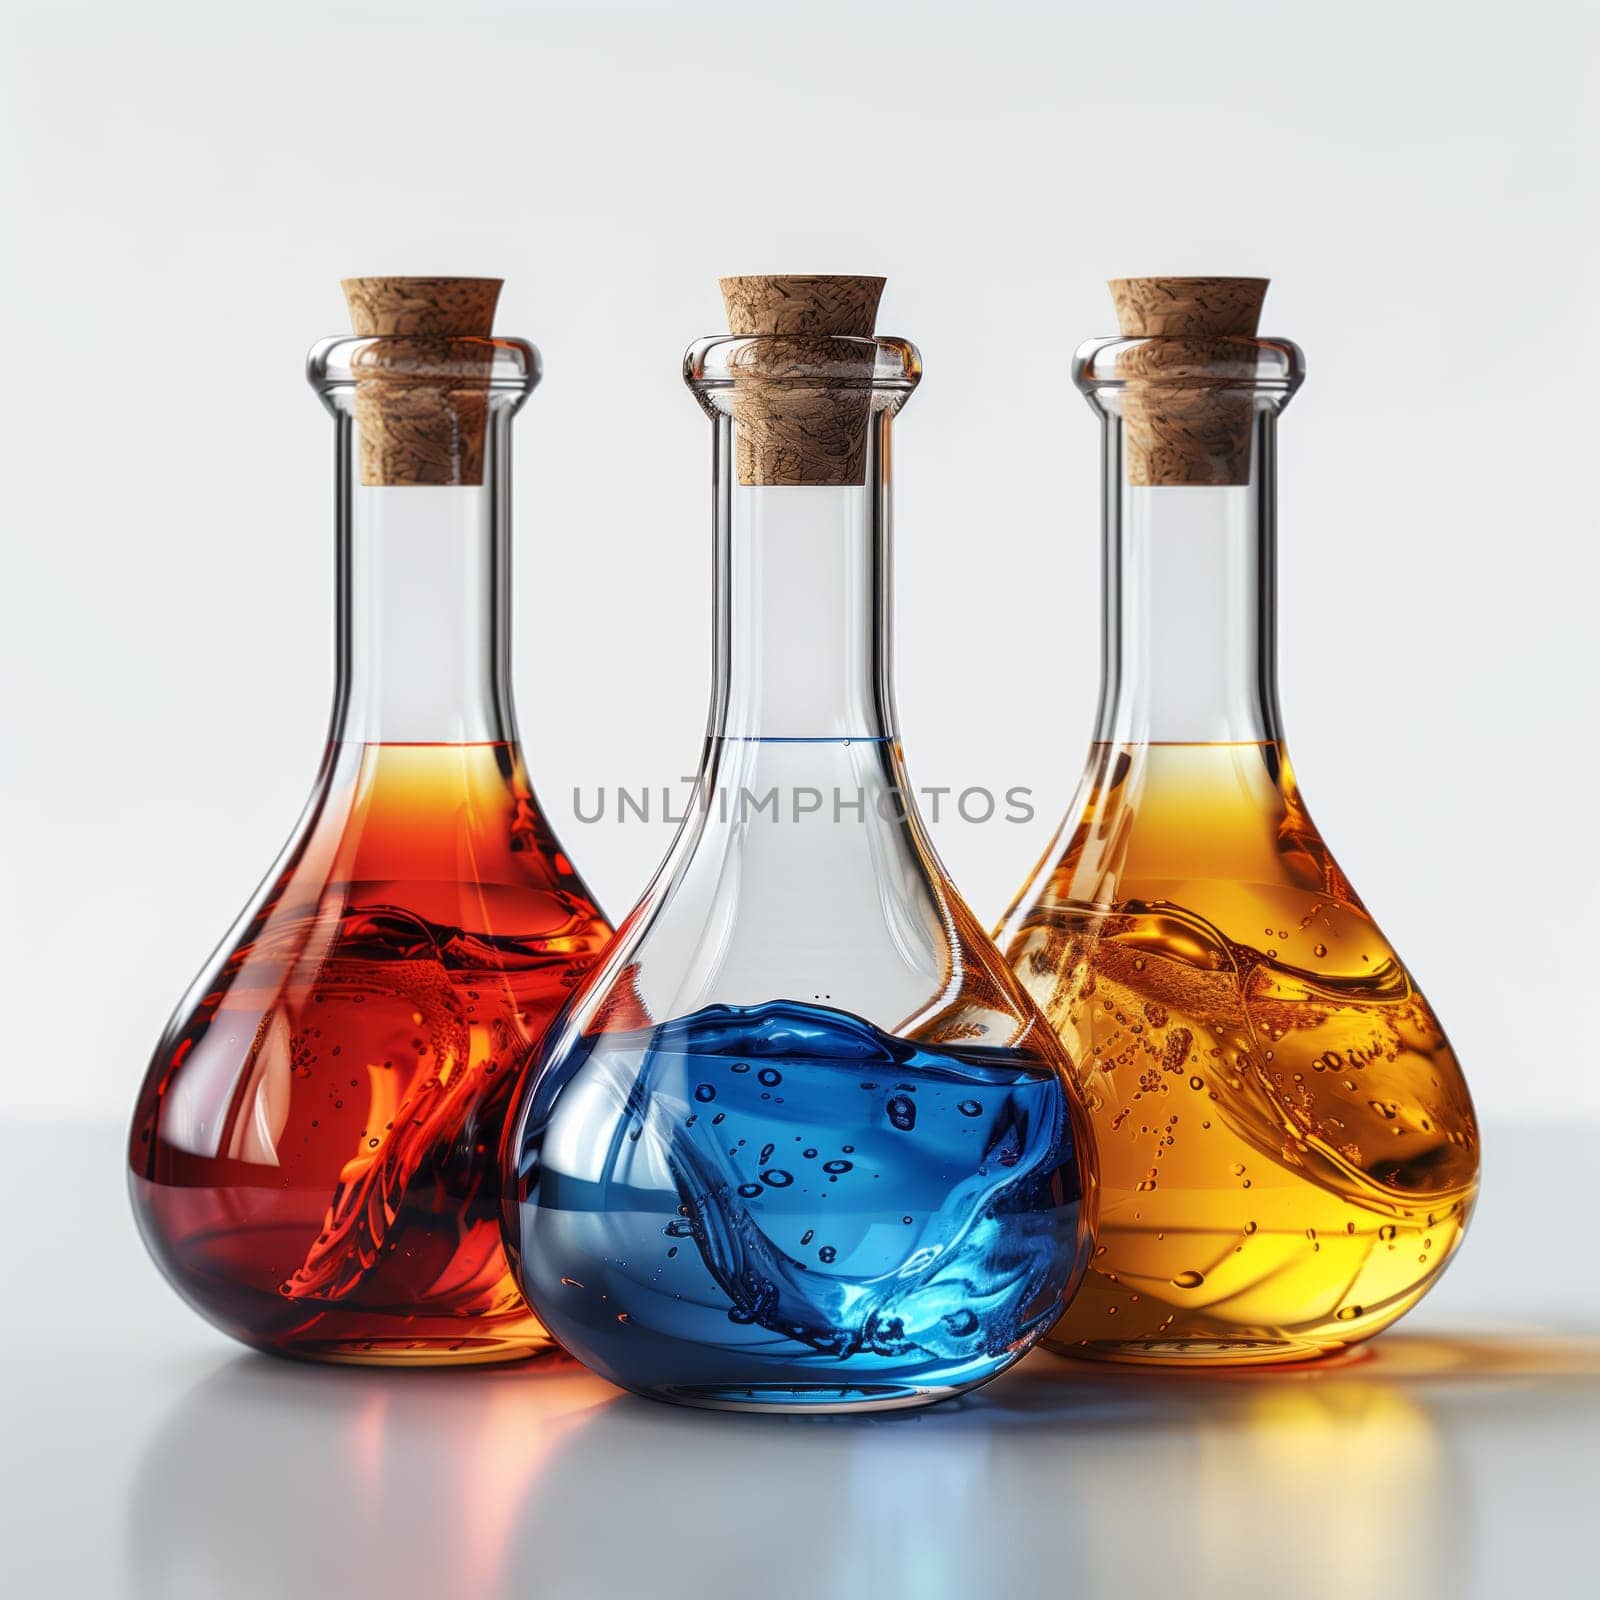 Three glass bottles with colorful liquids and corks displayed on a table by richwolf